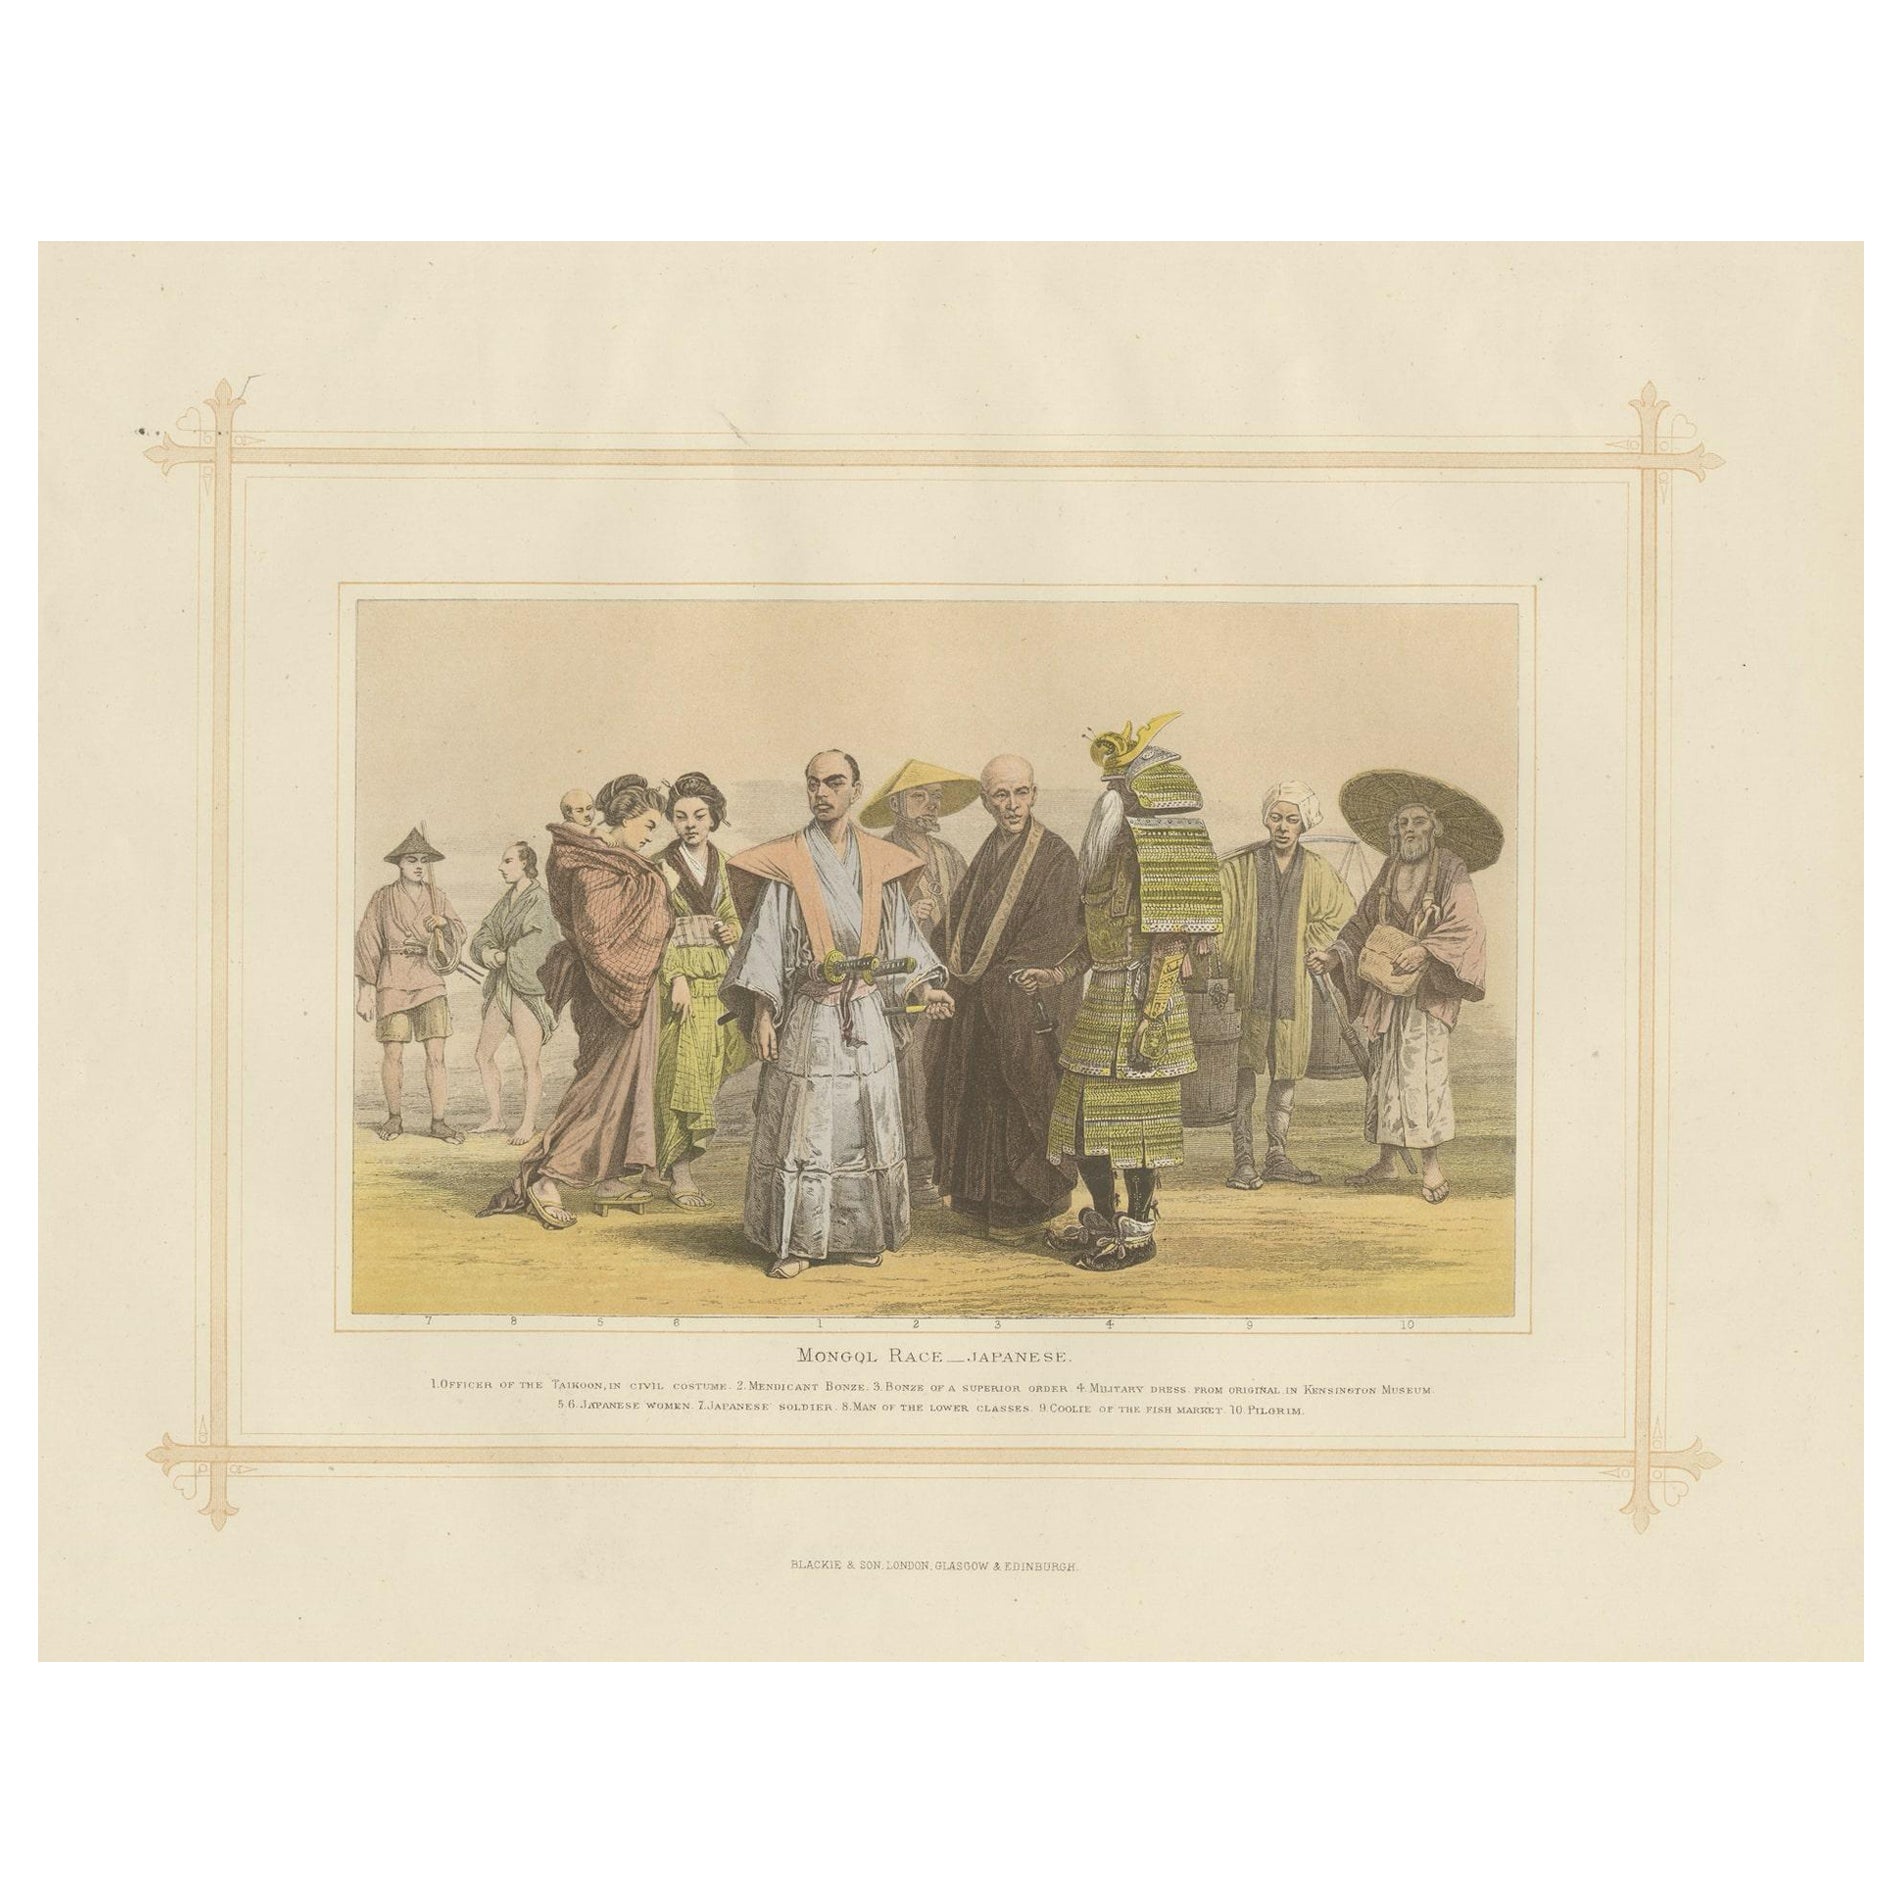 Antique Lithograph of the Mongol Race - Japanese, 1882 For Sale